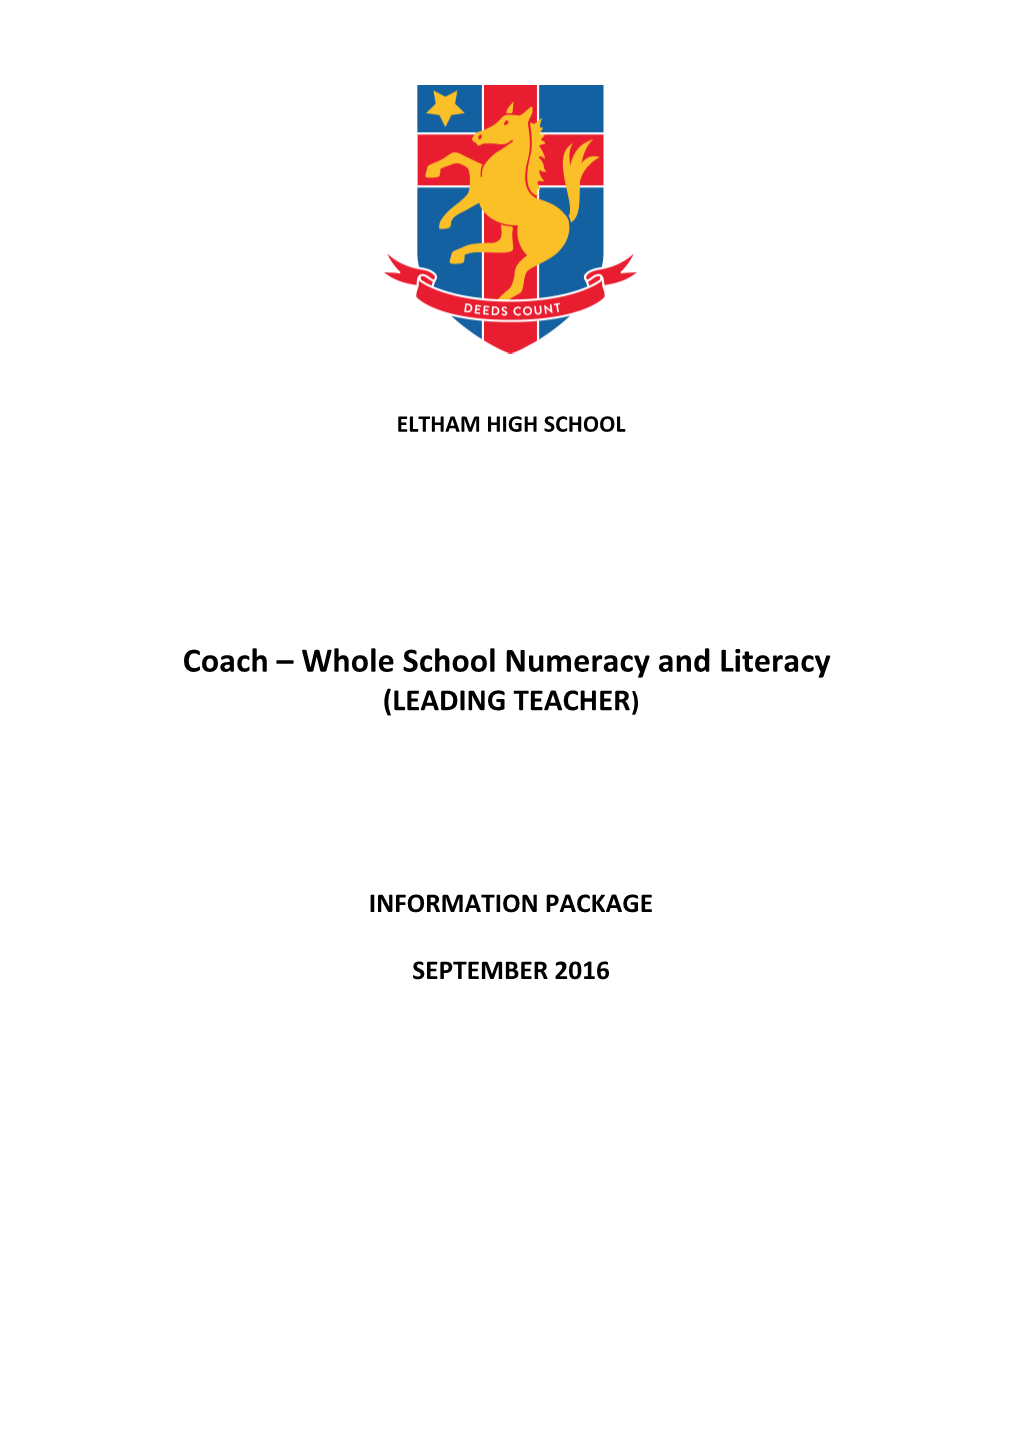 Coach Whole School Numeracy and Literacy